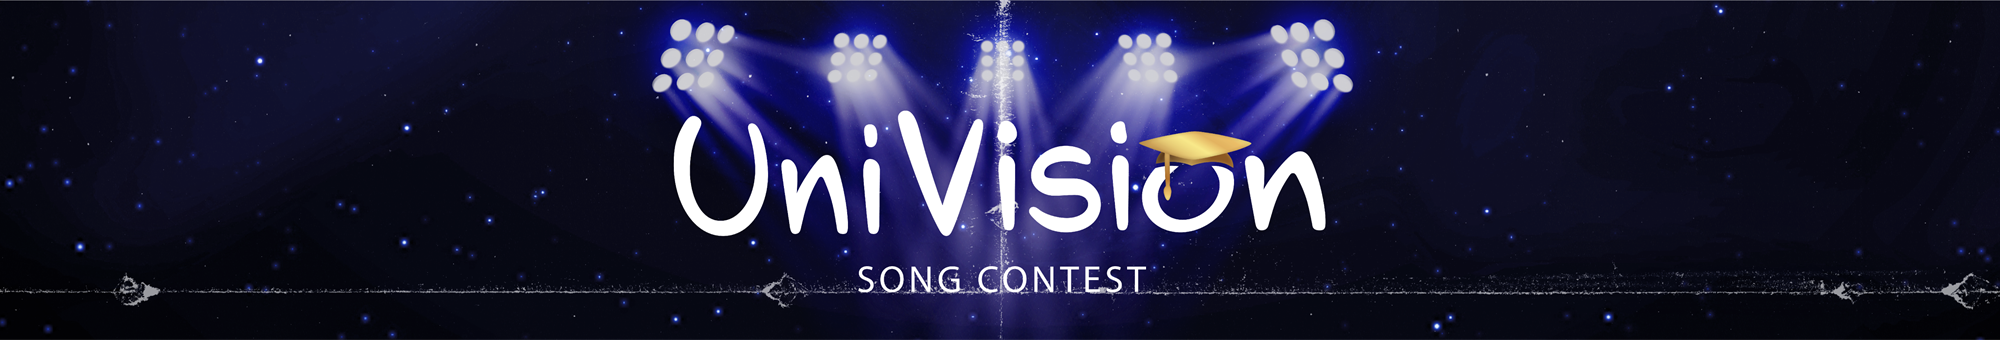 Inspired by the Eurovision Song Contest, Univision brings students from across the country together to represent their institutions in an all-out music competition. Hosted by the University of Surrey Students' Union, it is not to miss!